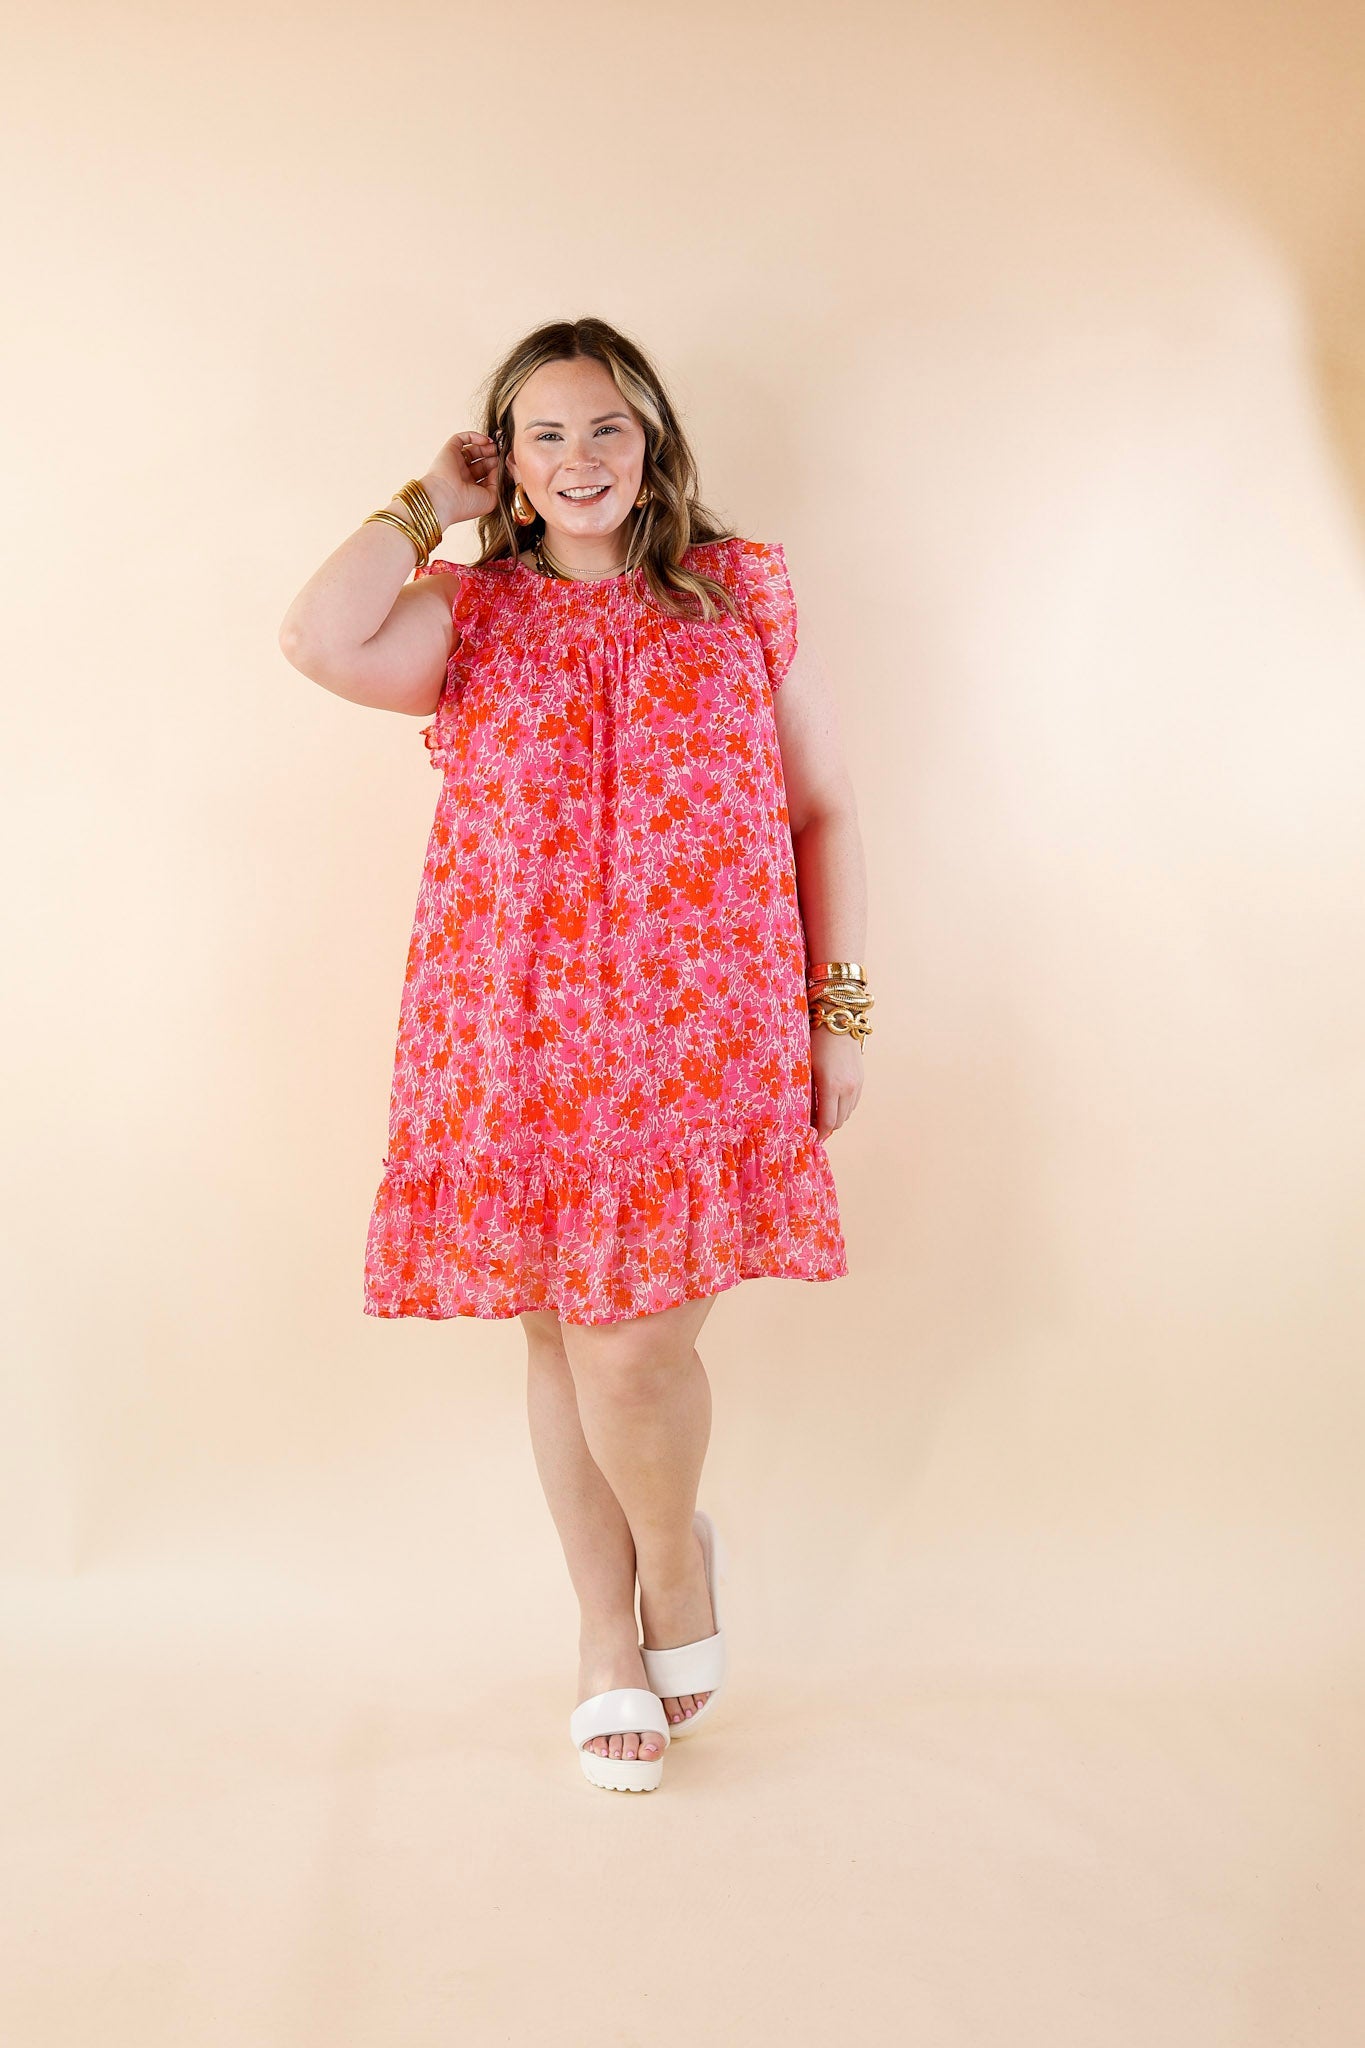 New To The Scene Floral Dress with Ruffle Cap Sleeves in Red and Pink - Giddy Up Glamour Boutique